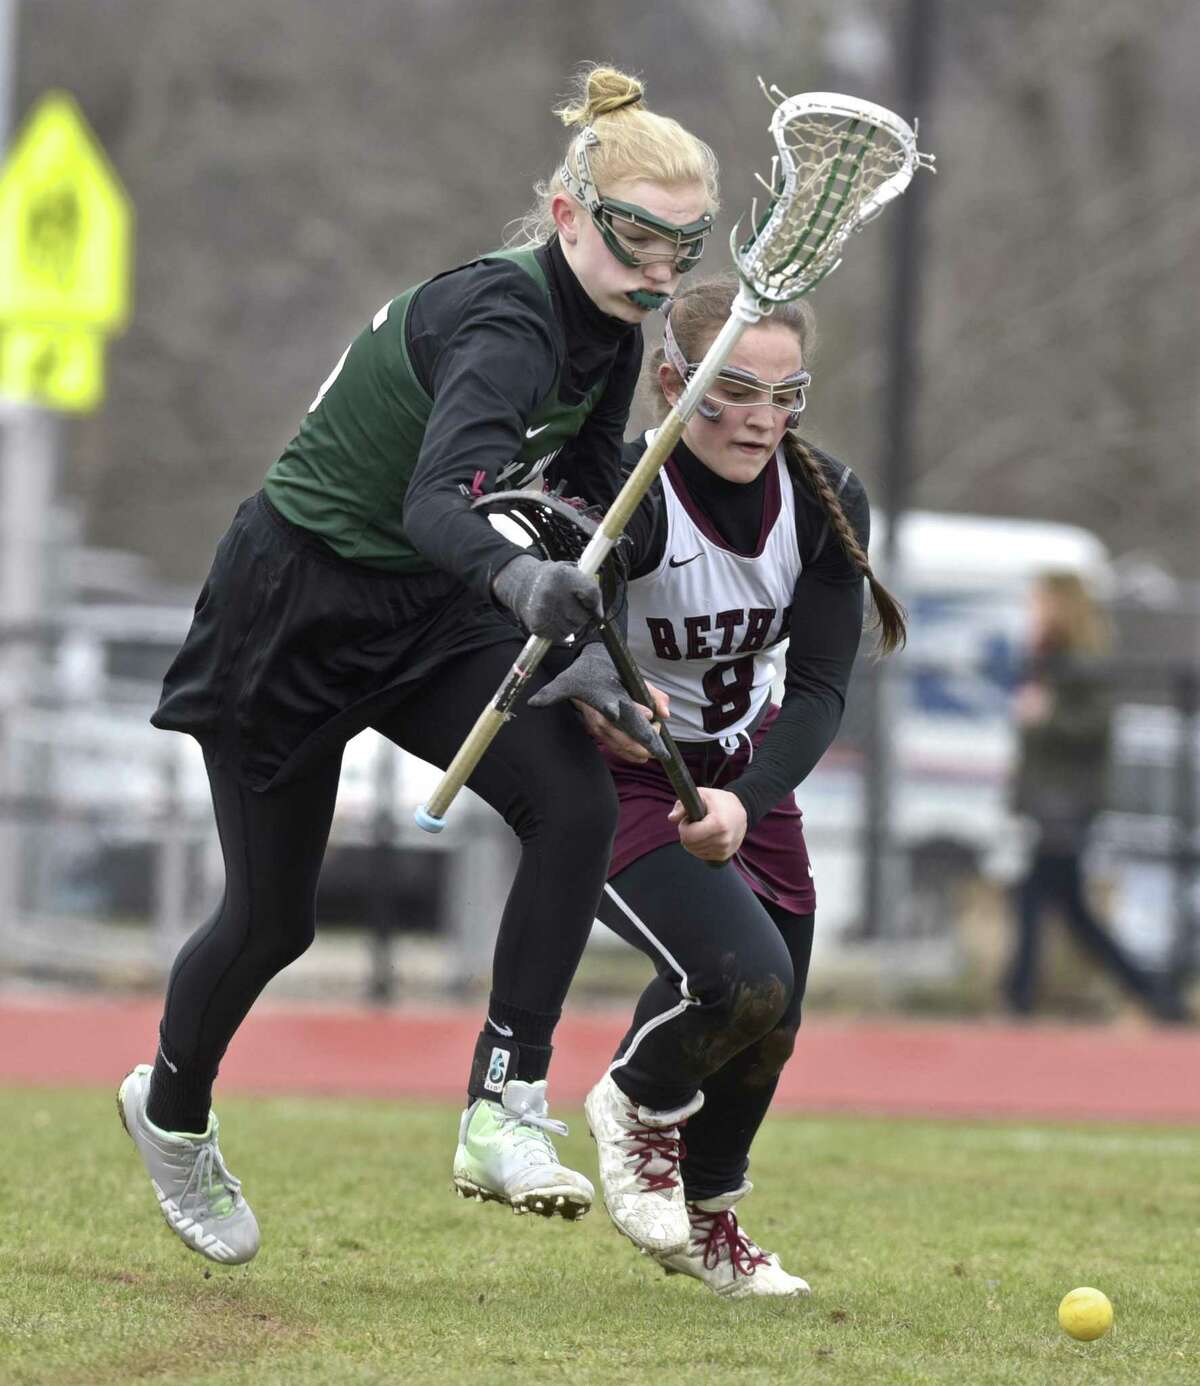 New Milford's Taylor Kersten (15) and Bethel's Christiana Ruiz (8) fight for the ball in the girls lacrosse game between New Milford and Bethel high schools, Saturday, April 7, 2018, at Bethel High School, Bethel, Conn.